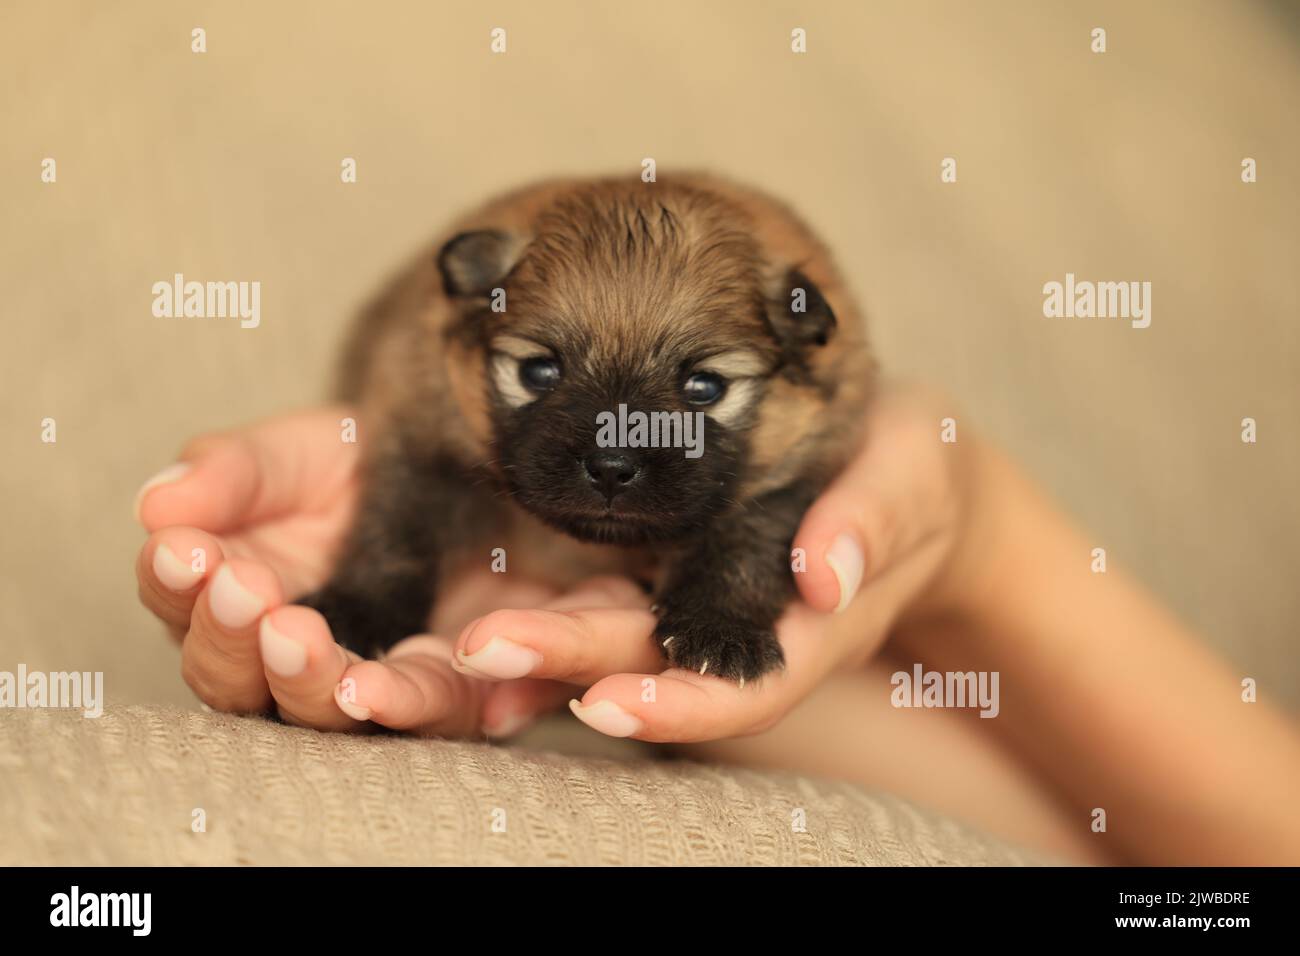 newborn puppy in the caring hands Stock Photo